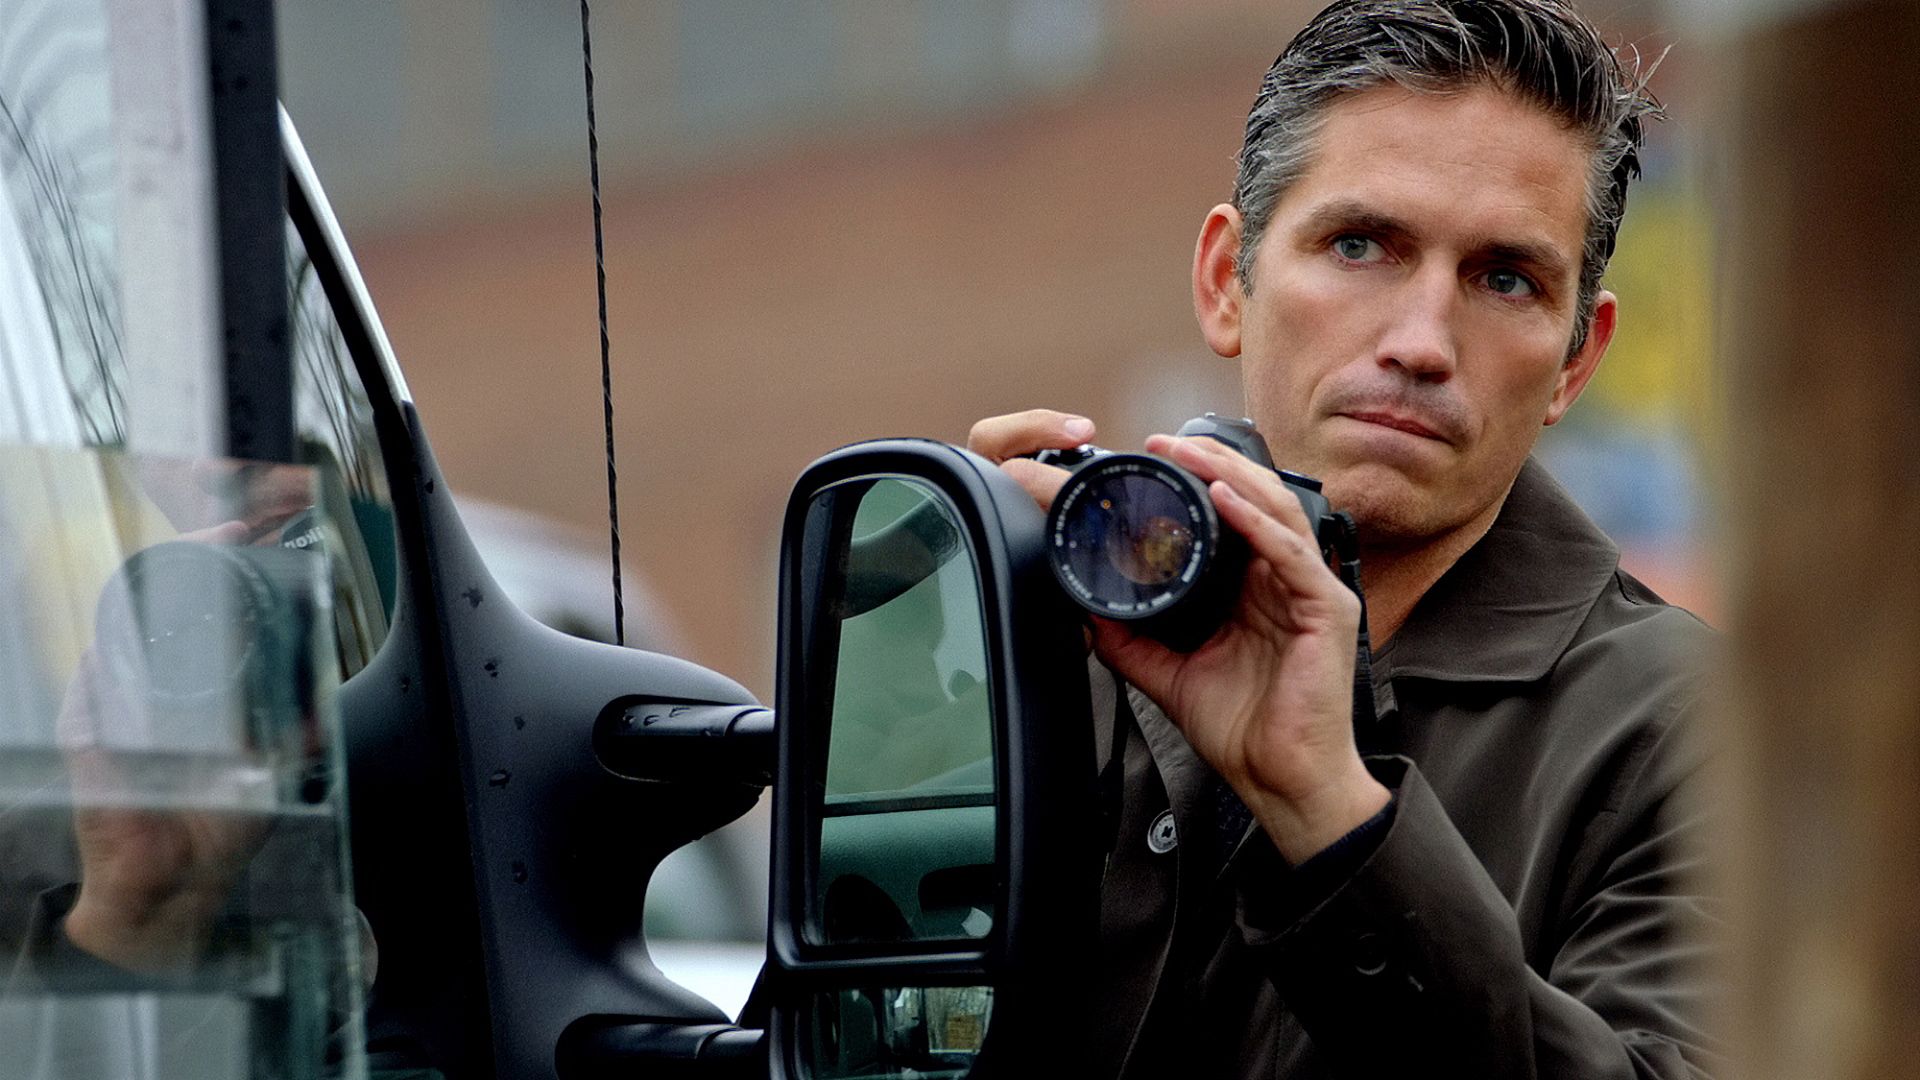 Person of Interest background